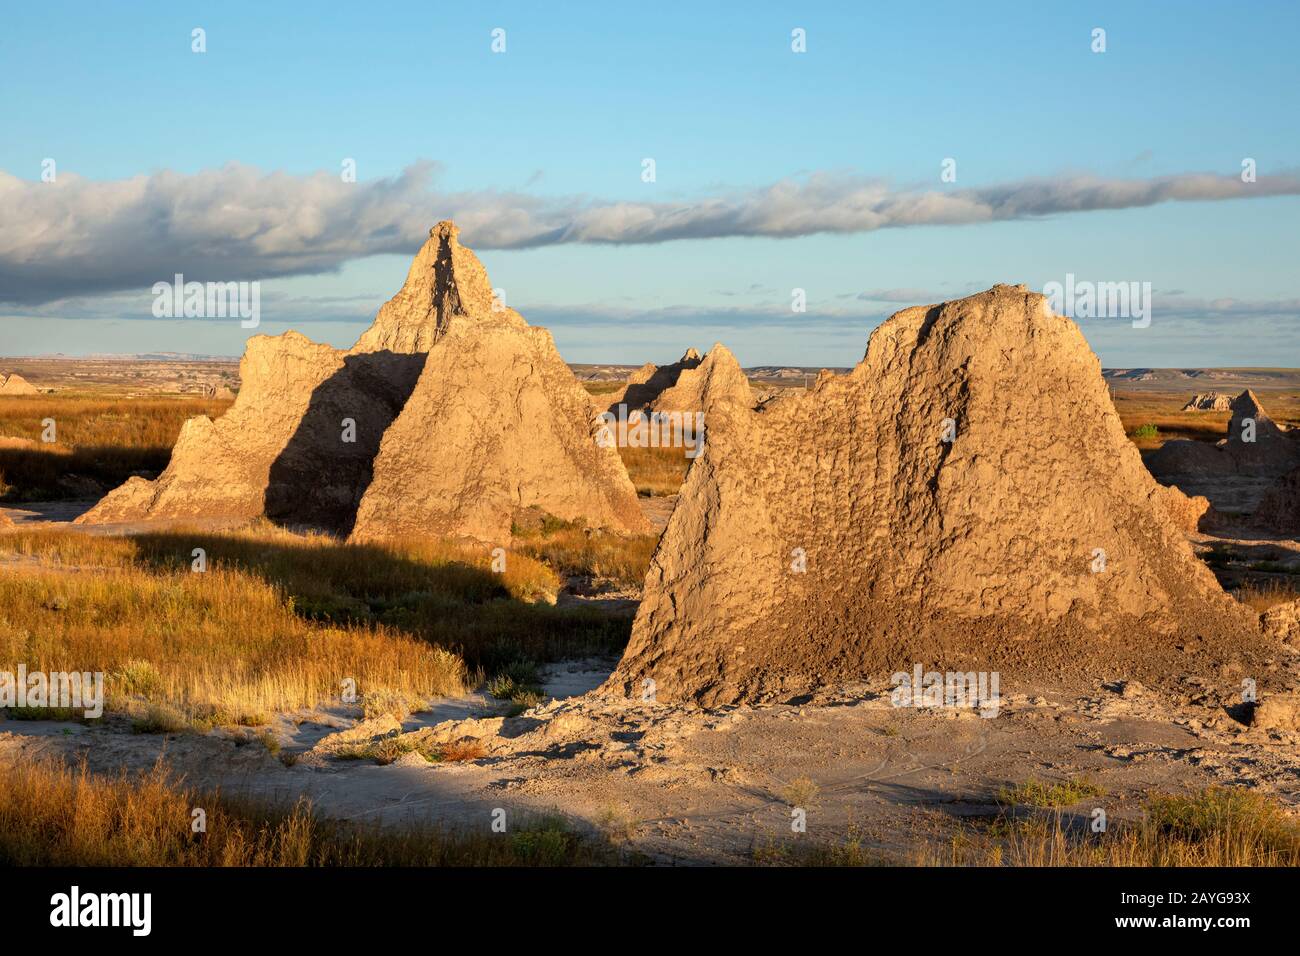 SD00109-00...SOUTH DAKOTA - Crags in the grasslands of the Great Plains in Badlands National Park. Stock Photo